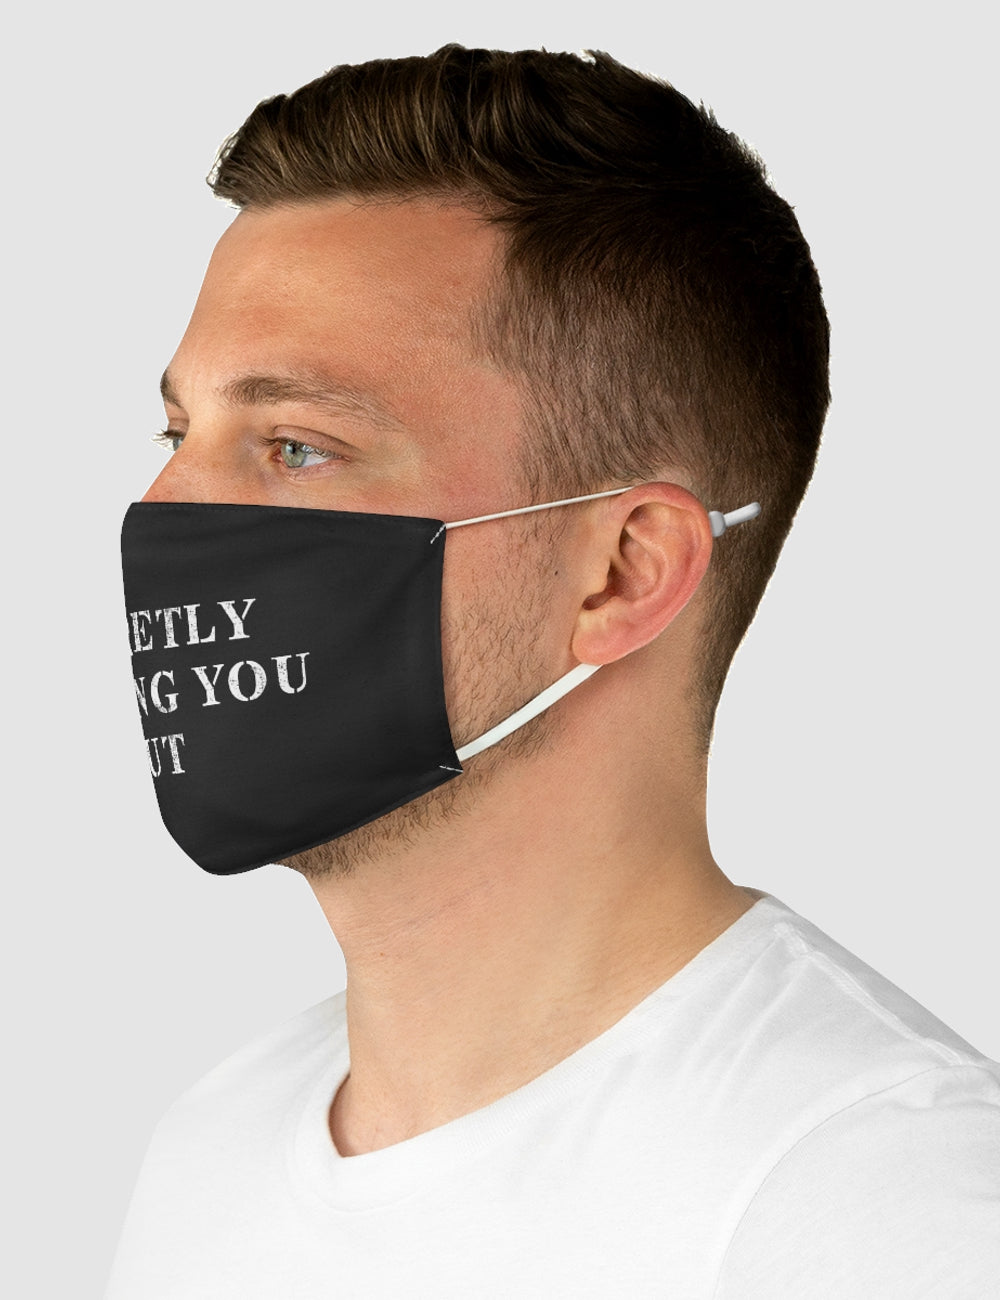 Secretly Cursing You Out | Two-Layer Polyester Fabric Face Mask OniTakai